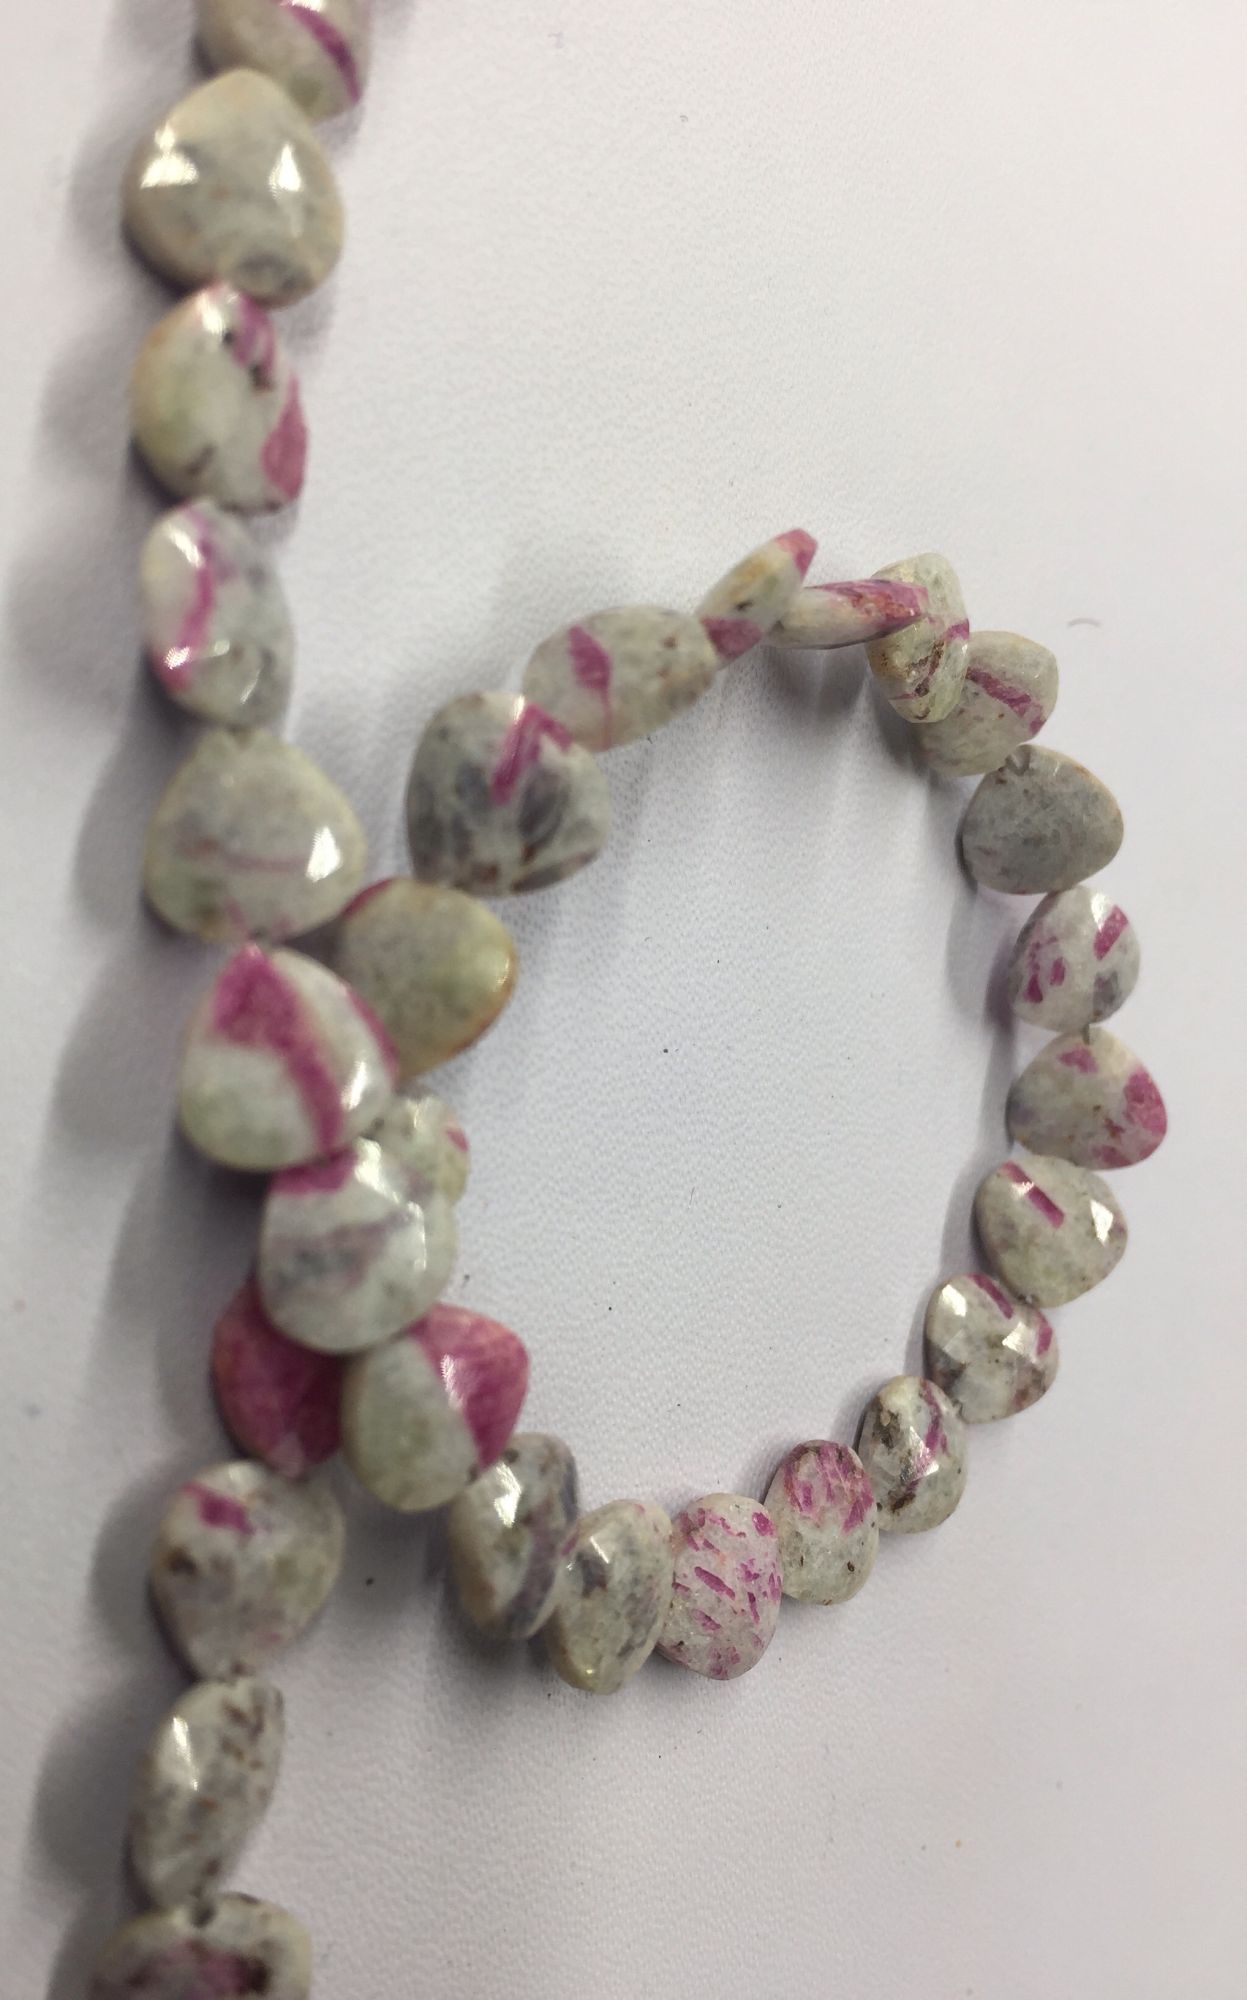 Ruby Zosite Hearts Faceted